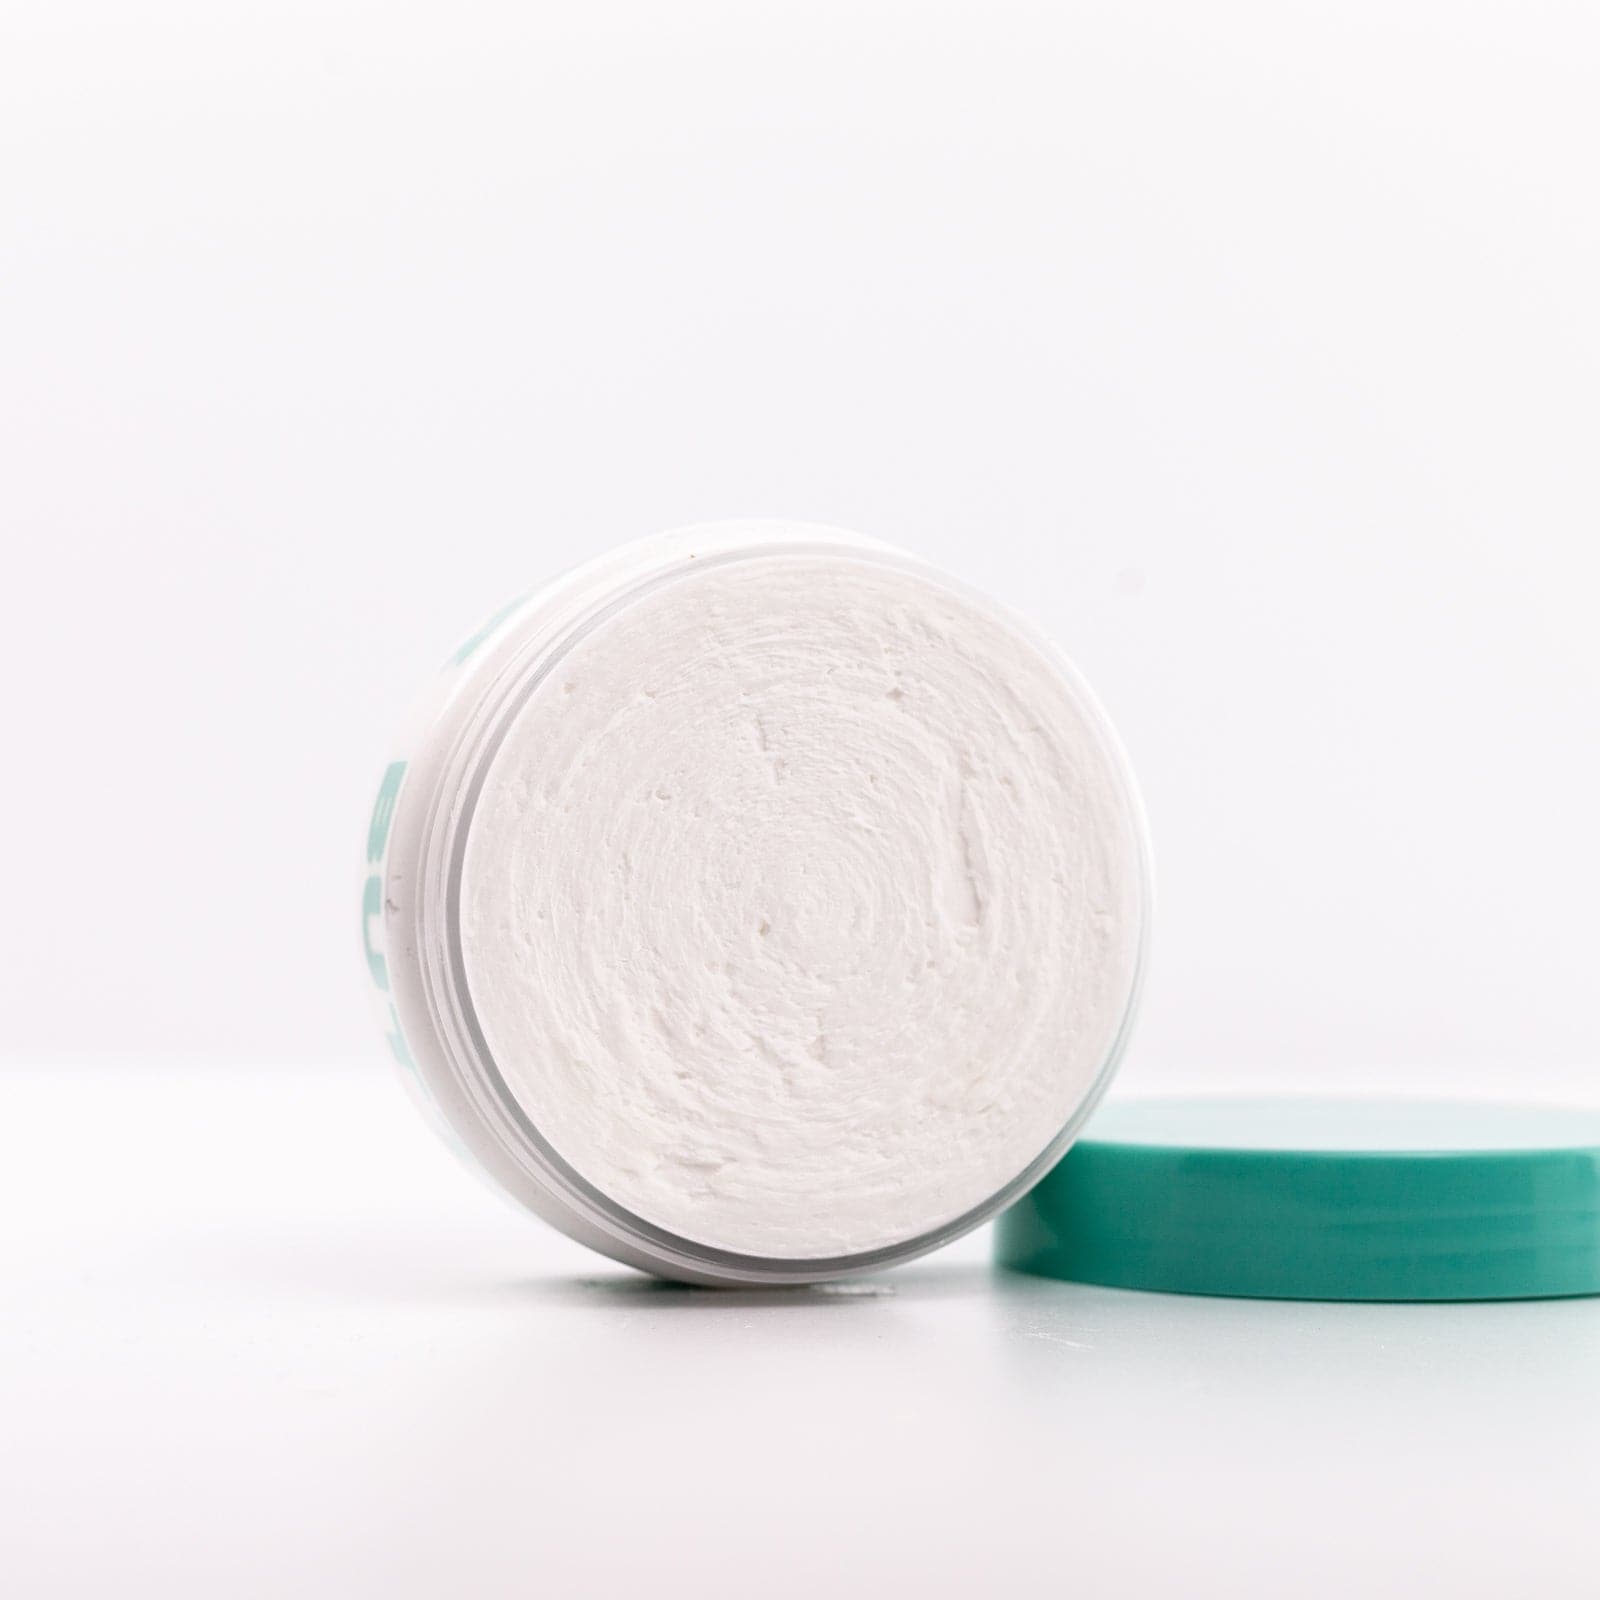 Clear Body Butter container on side with teal lid off in front of white background